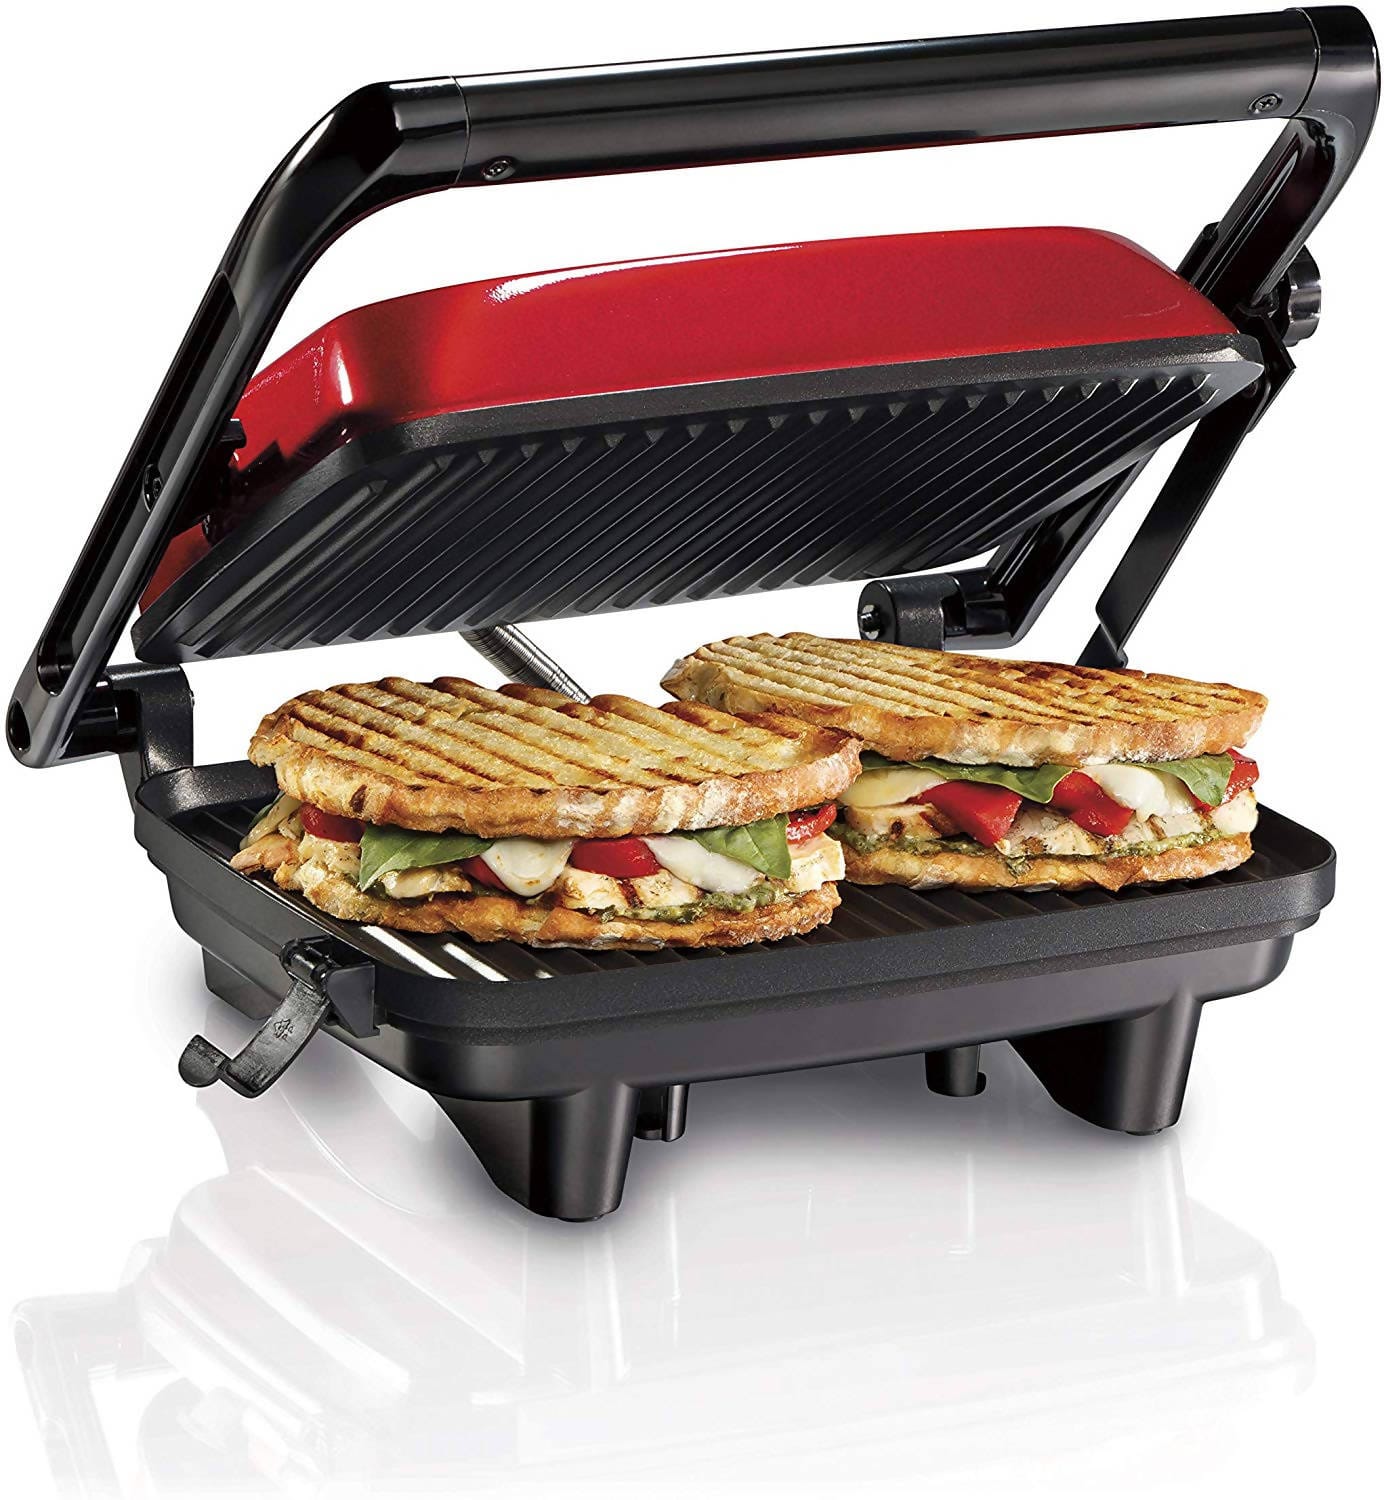 Hamilton Beach Panini Press 10 inch x 8 inch Gourmet Enjoy hot and delicious grilled sandwiches at home with the Hamilton Beach Panini Press Sandwich Make-68821-40094254606